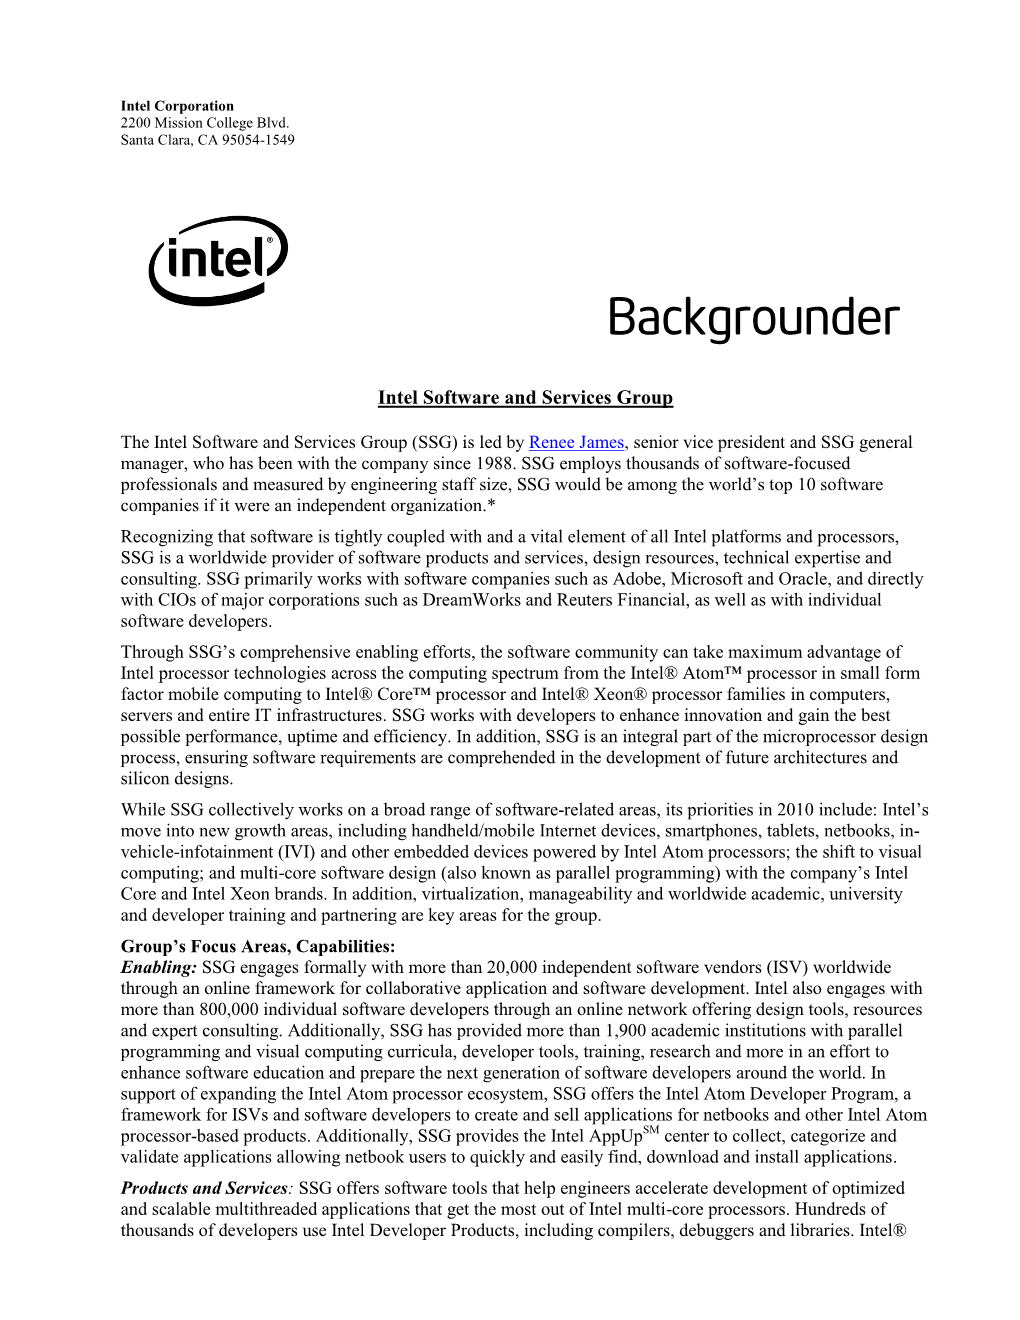 Backgrounder: Intel Software and Services Group